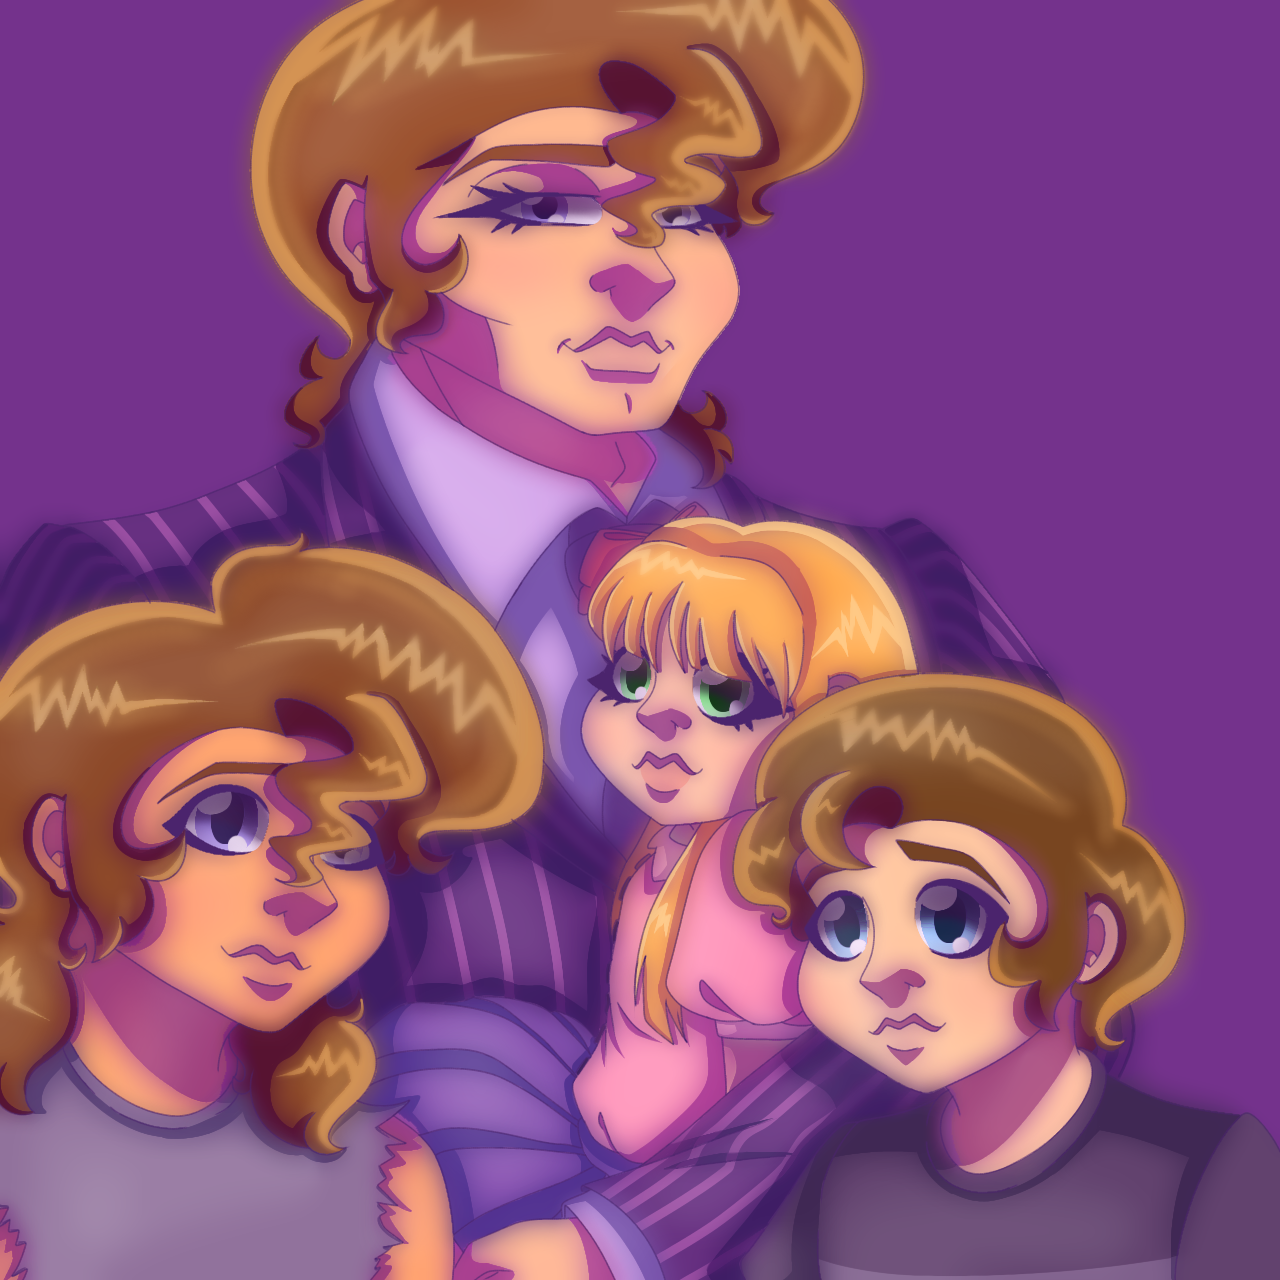 The Afton Family by PrincessRi27 on DeviantArt